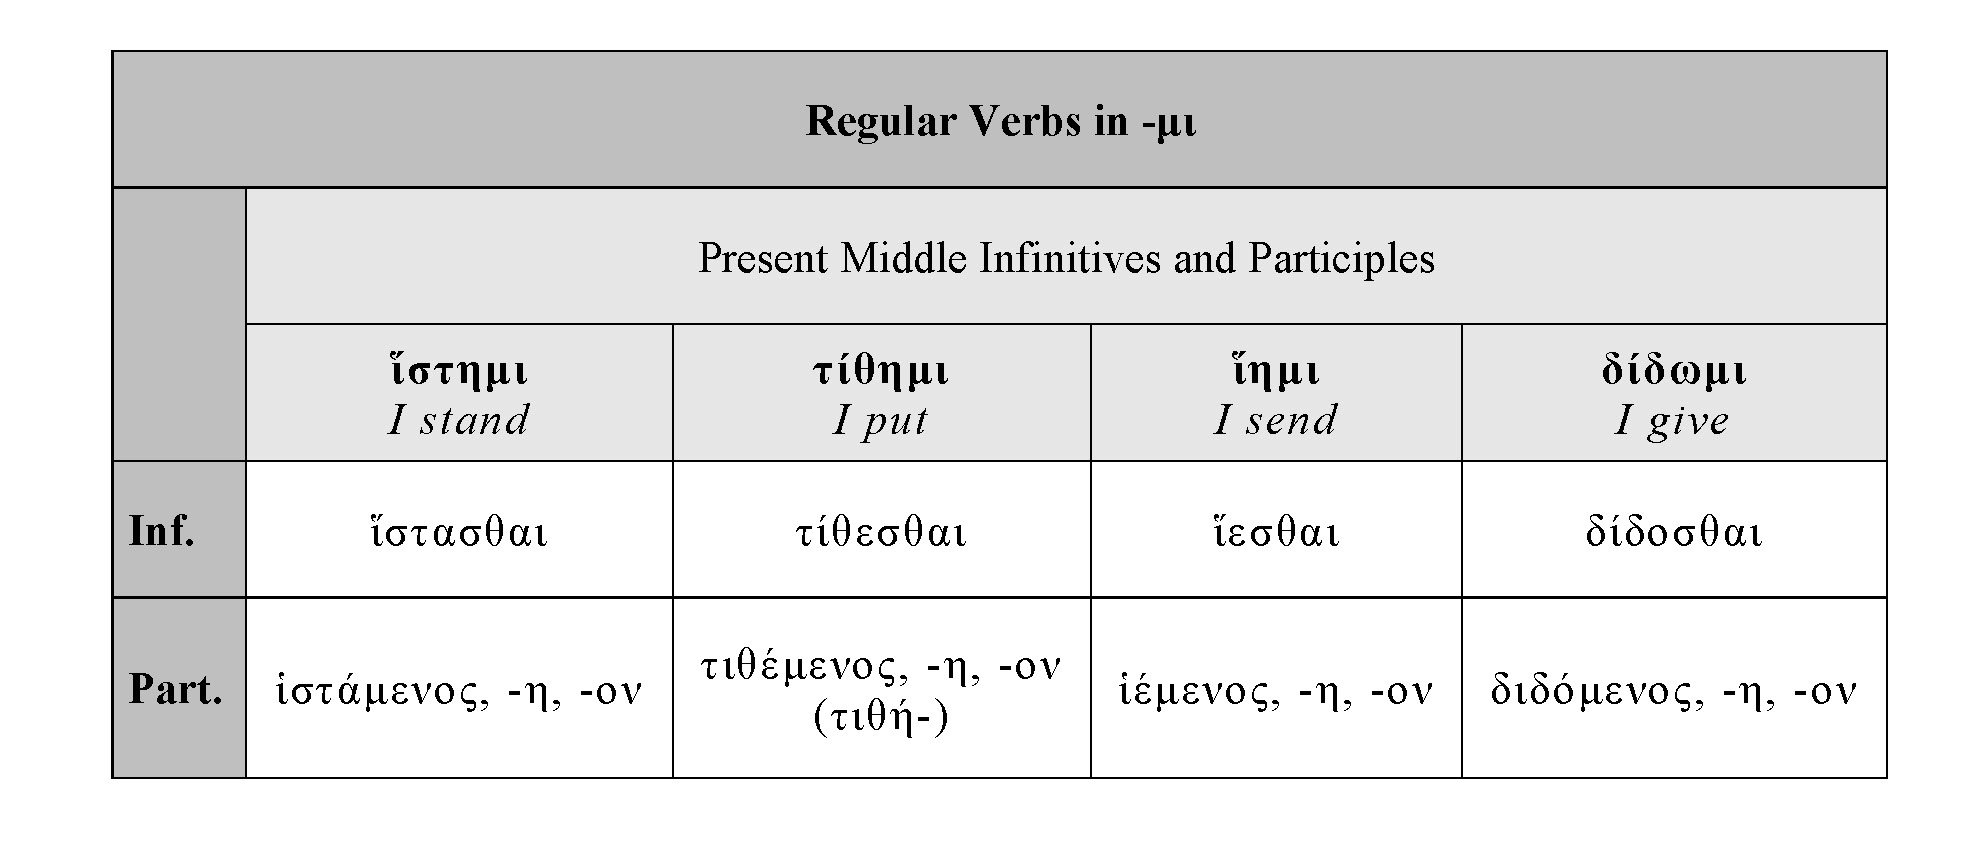 HOMERIC VERBS: -ΜΙ PRESENT MIDDLE INFINITIVES AND PARTICIPLES